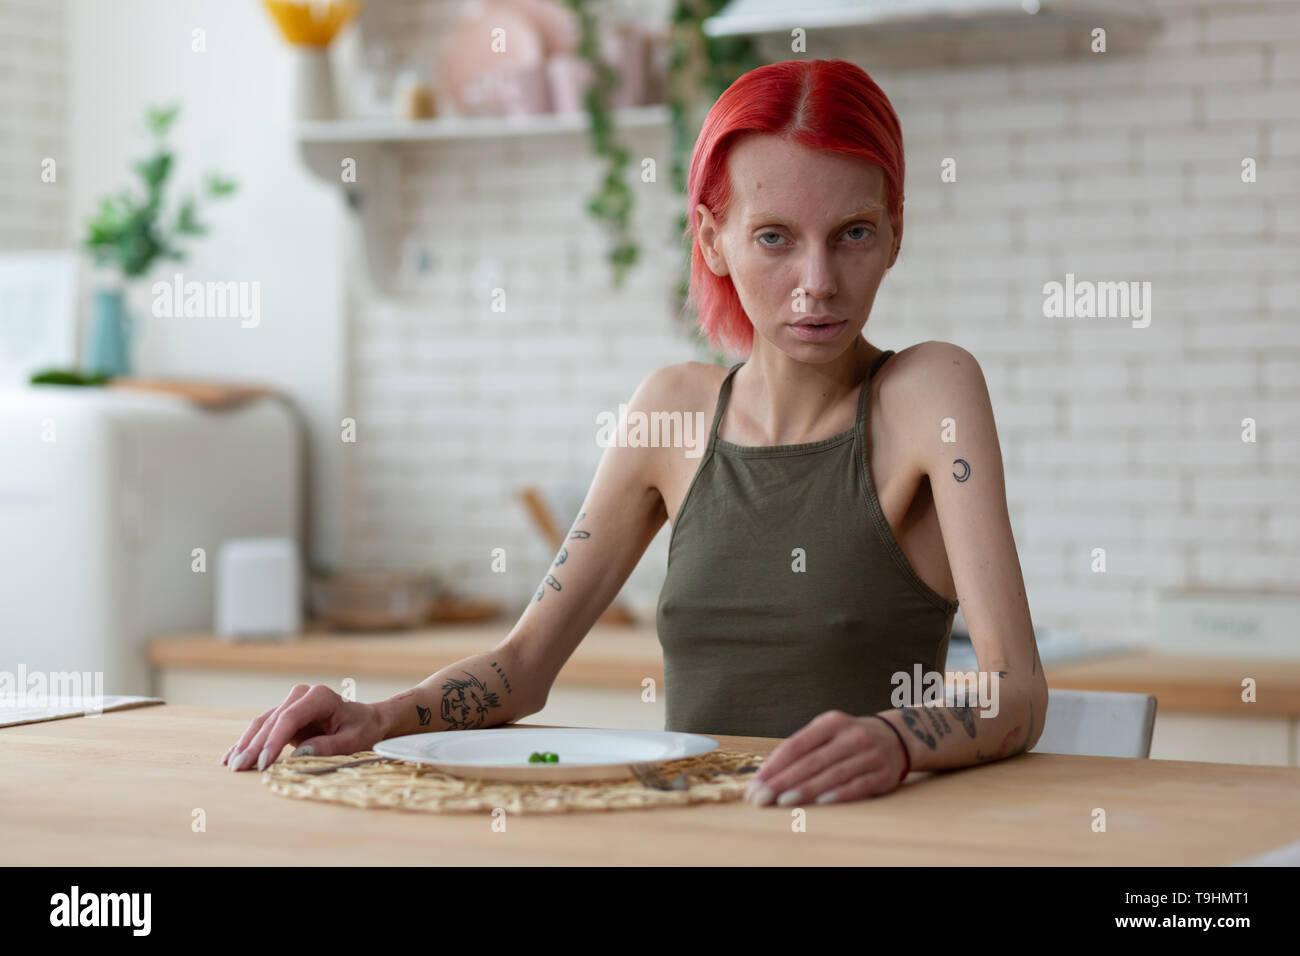 Red-haired anorexic woman sitting in the kitchen alone Stock Photo